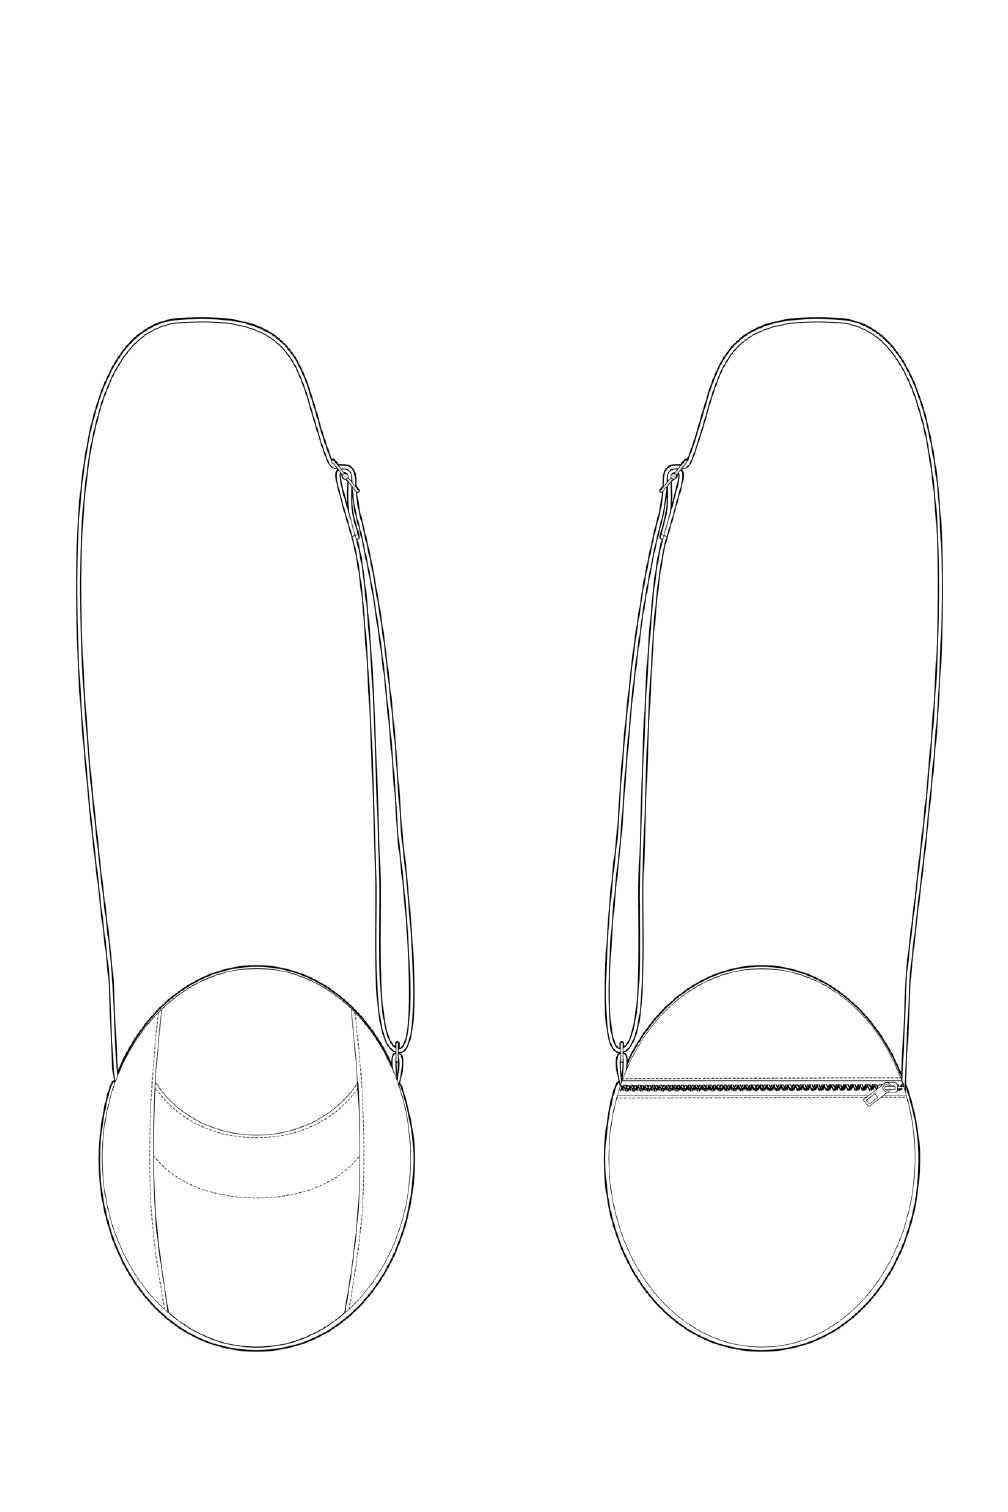 a line drawing of l'Oeuf Bag